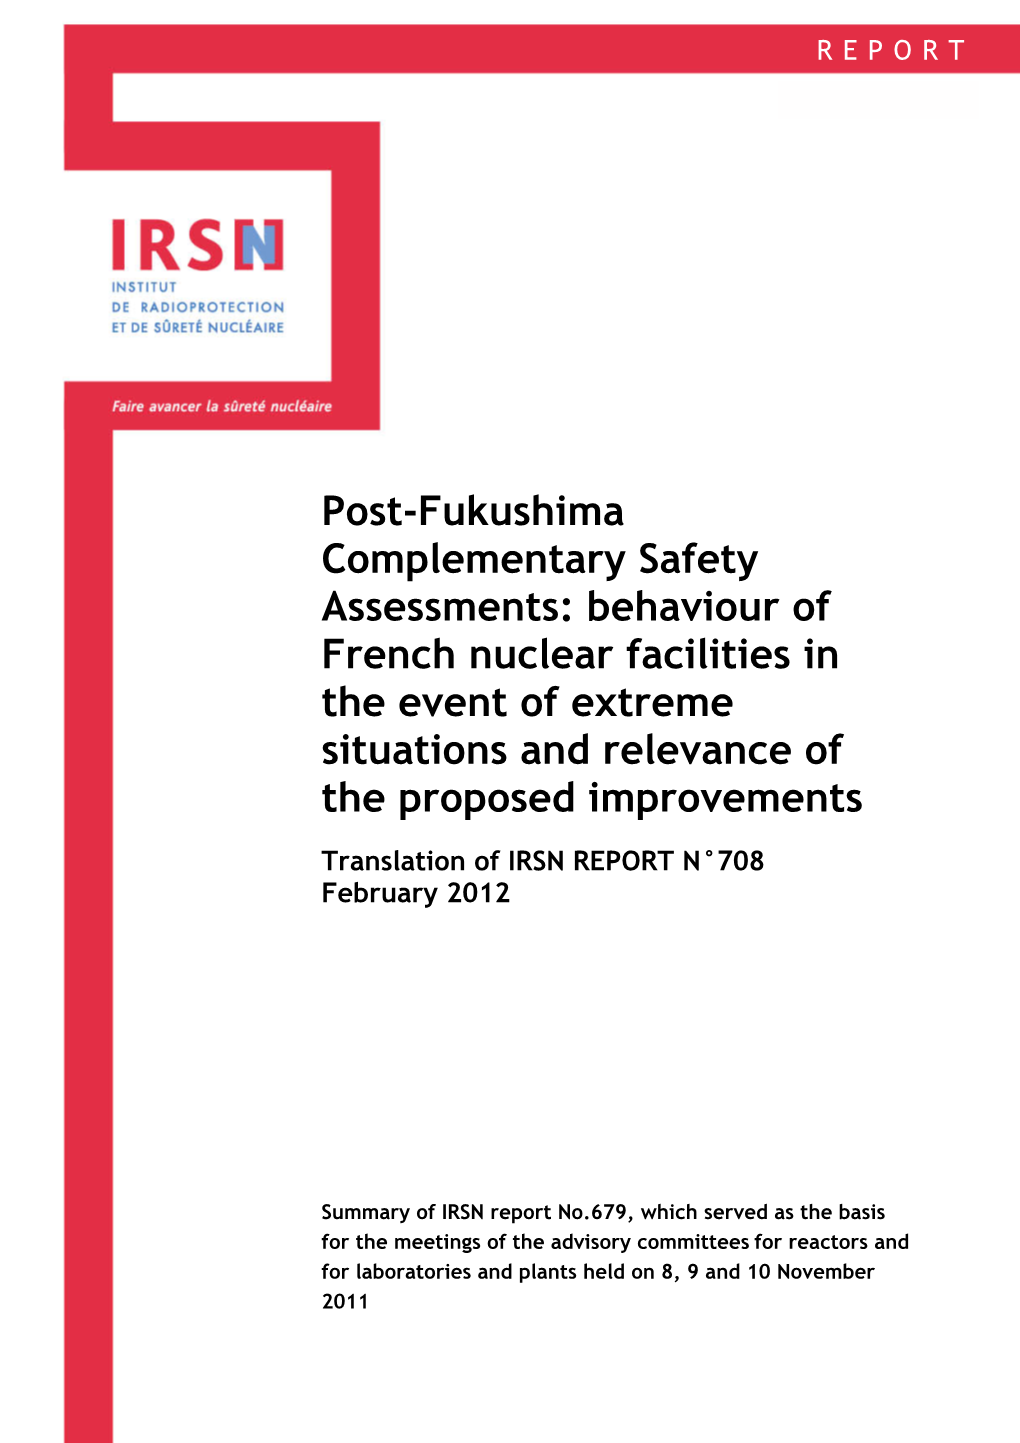 Behaviour of French Nuclear Facilities in the Event of Extreme Situations and Relevance of the Proposed Improvements